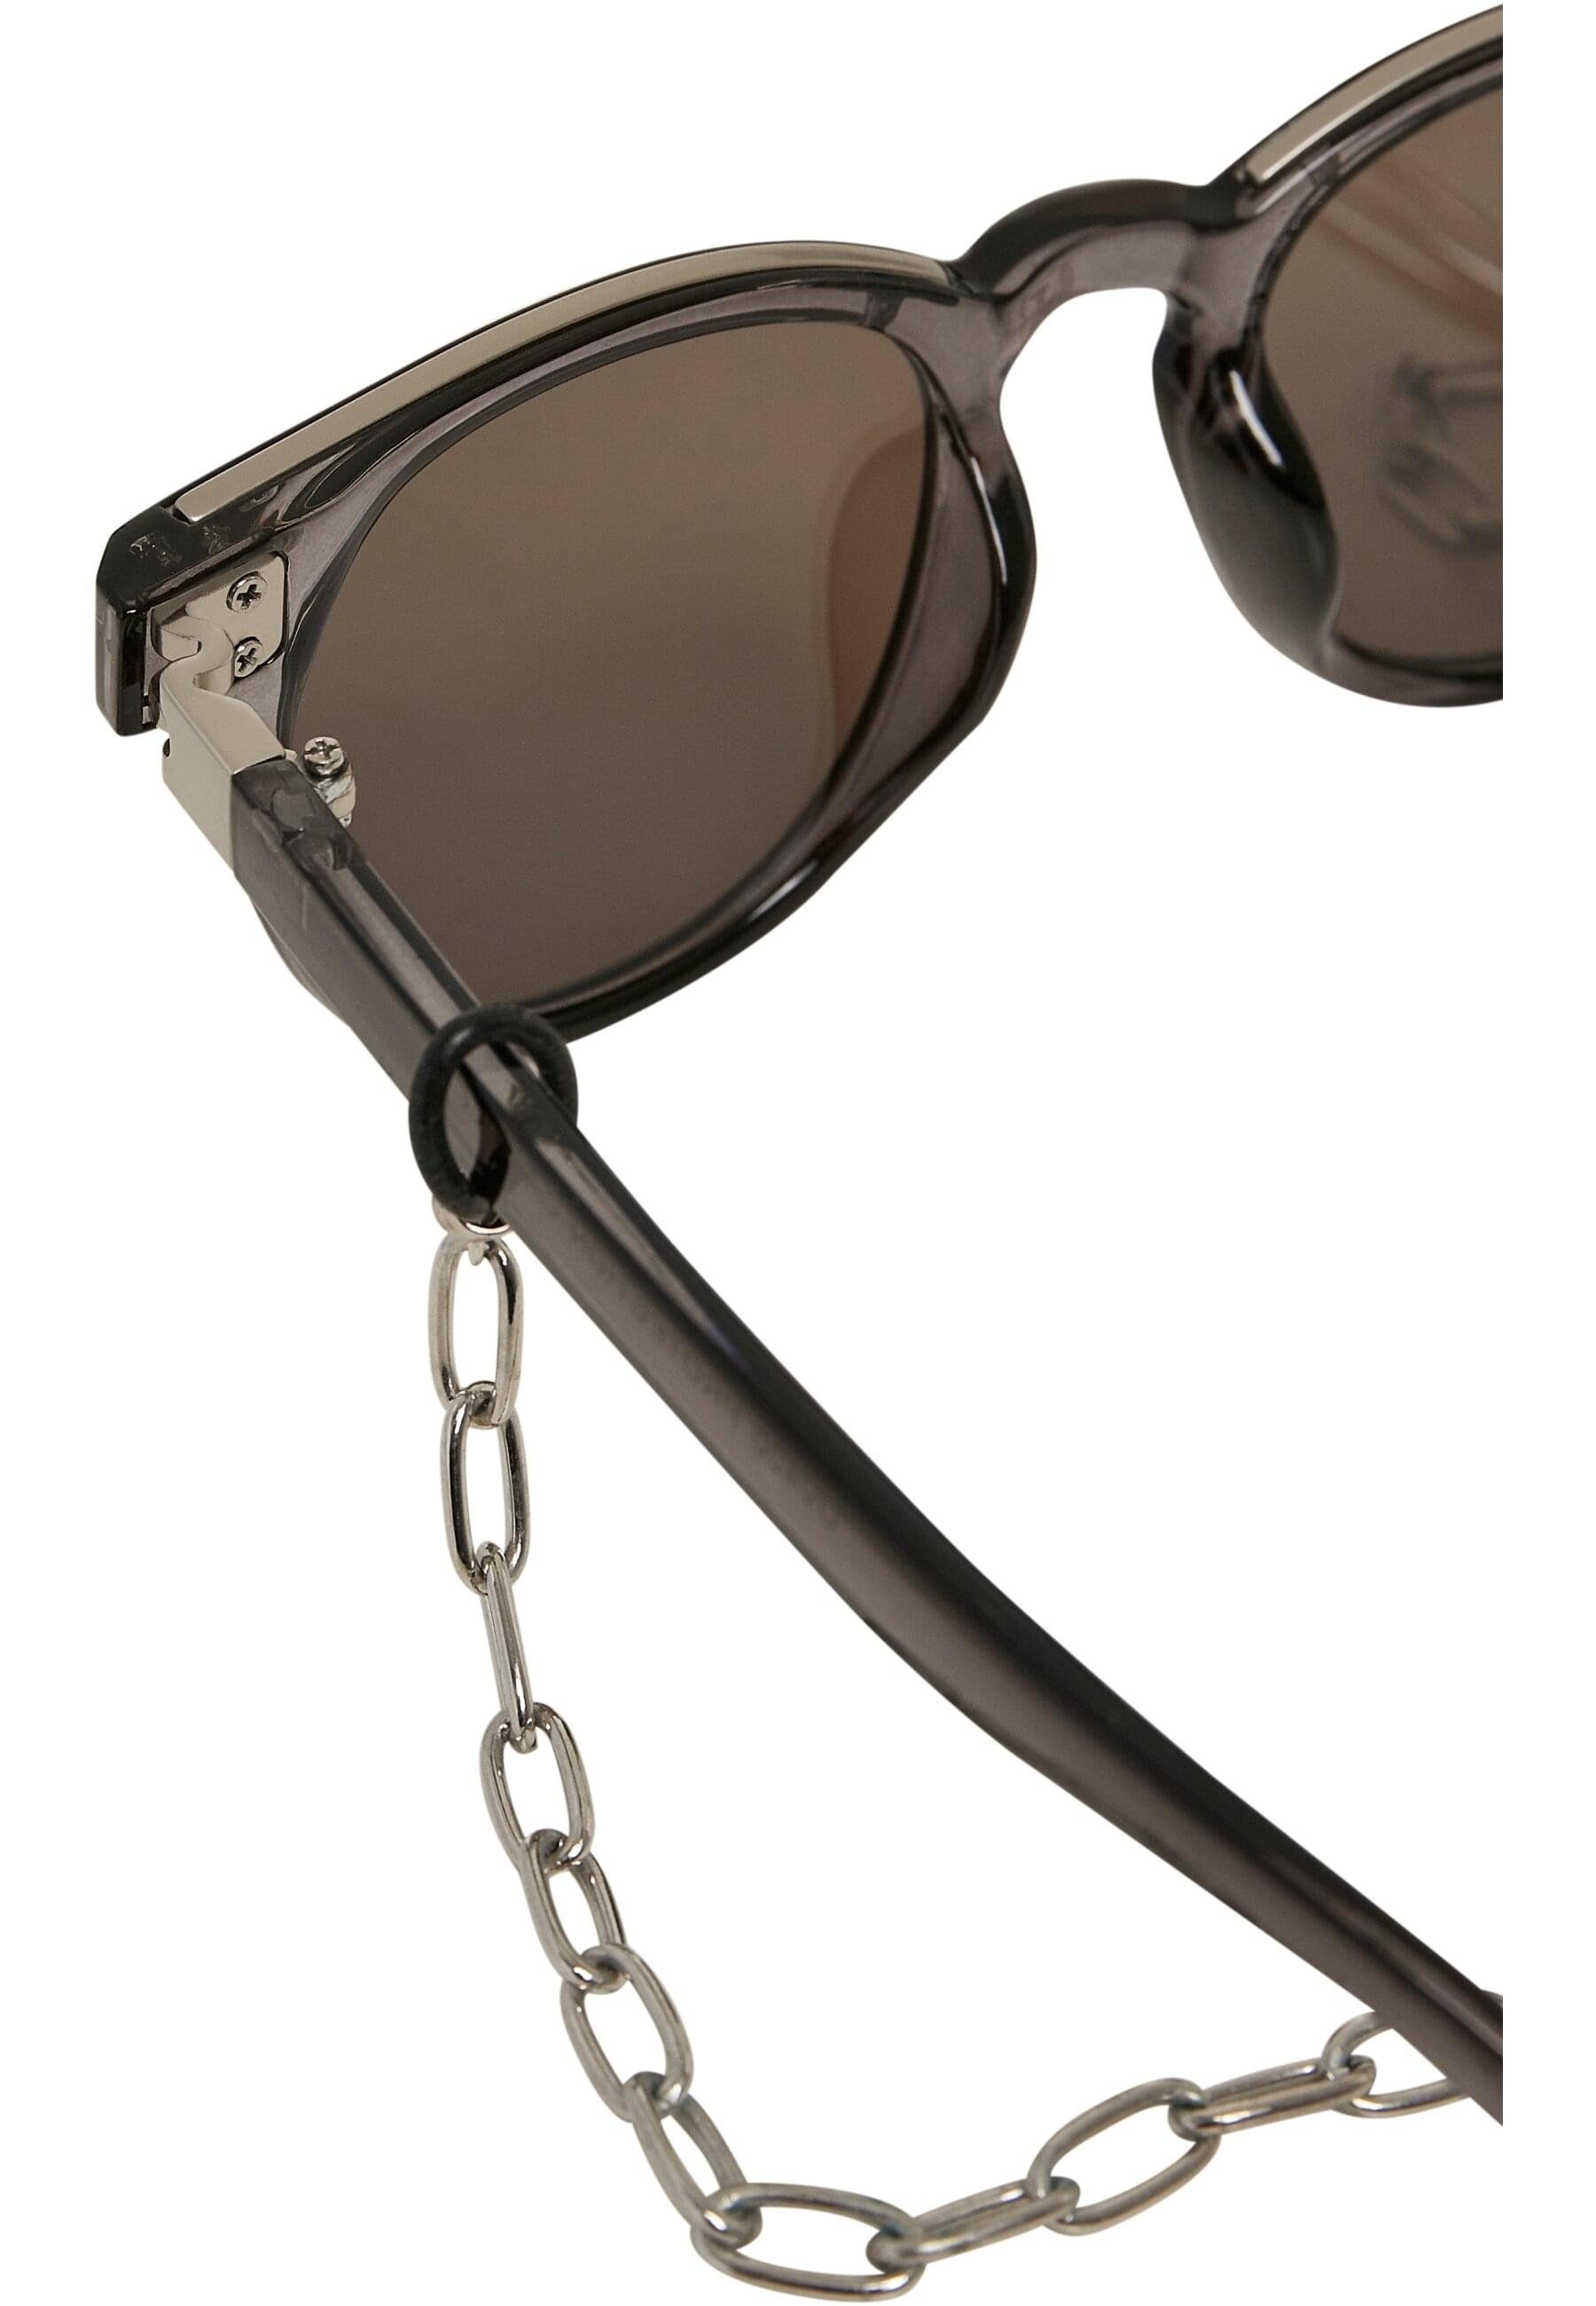 Sonnenbrille Italy URBAN grey/silver/silver Sunglasses CLASSICS with chain Unisex